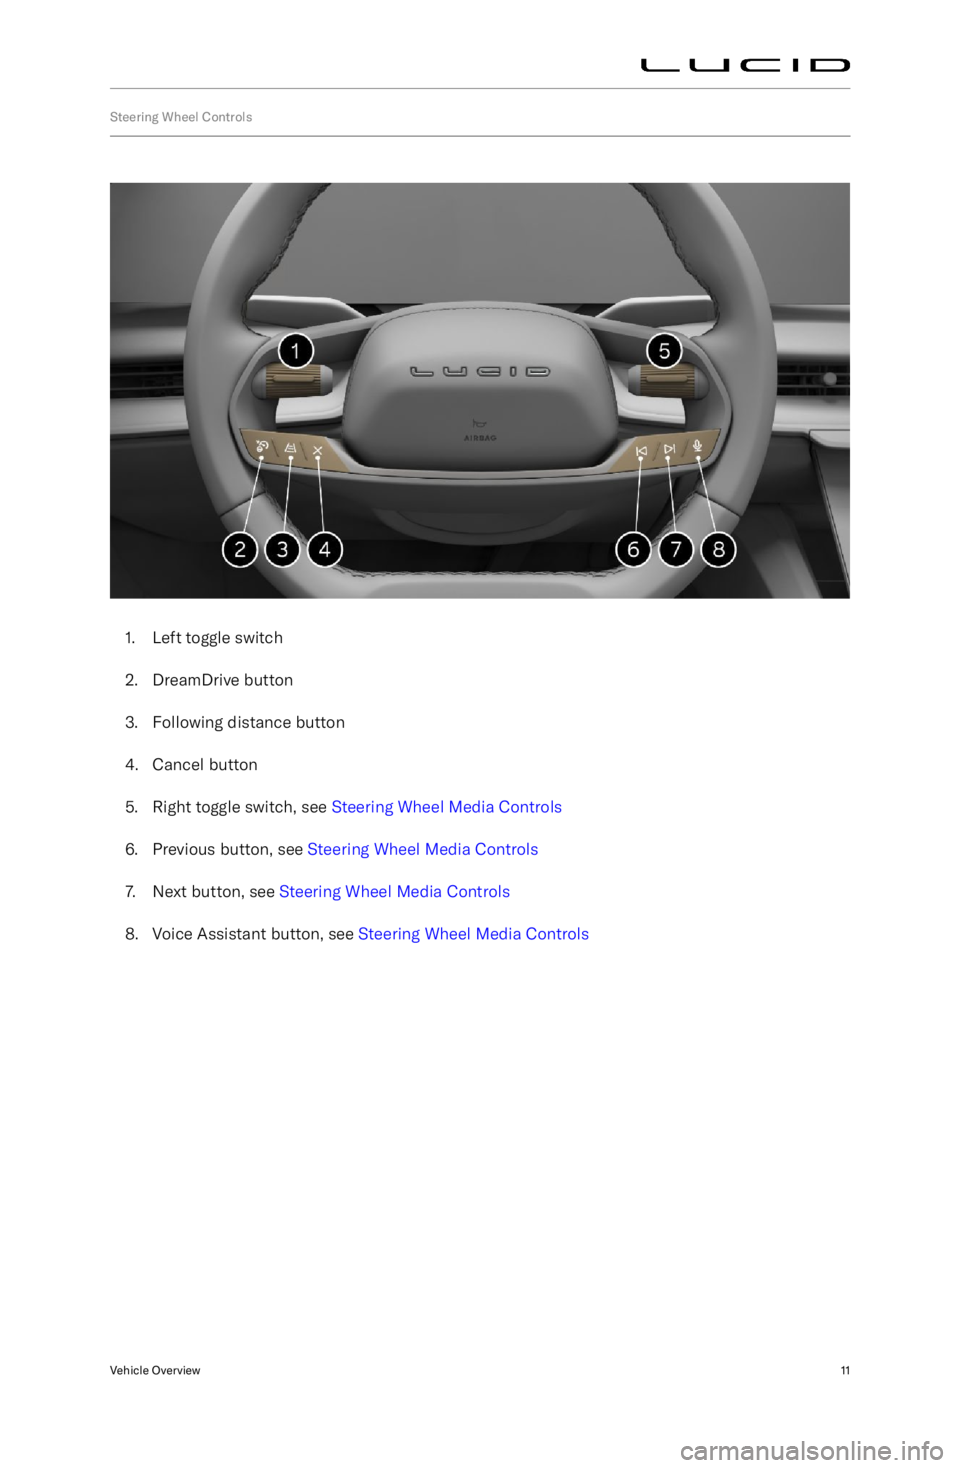 LUCID AIR 2023  Owners Manual Steering Wheel Controls
1. Left toggle switch
2. DreamDrive button
3. Following distance button
4. Cancel button
5. Right  toggle switch, see  Steering Wheel Media Controls
6. Previous button, see  St